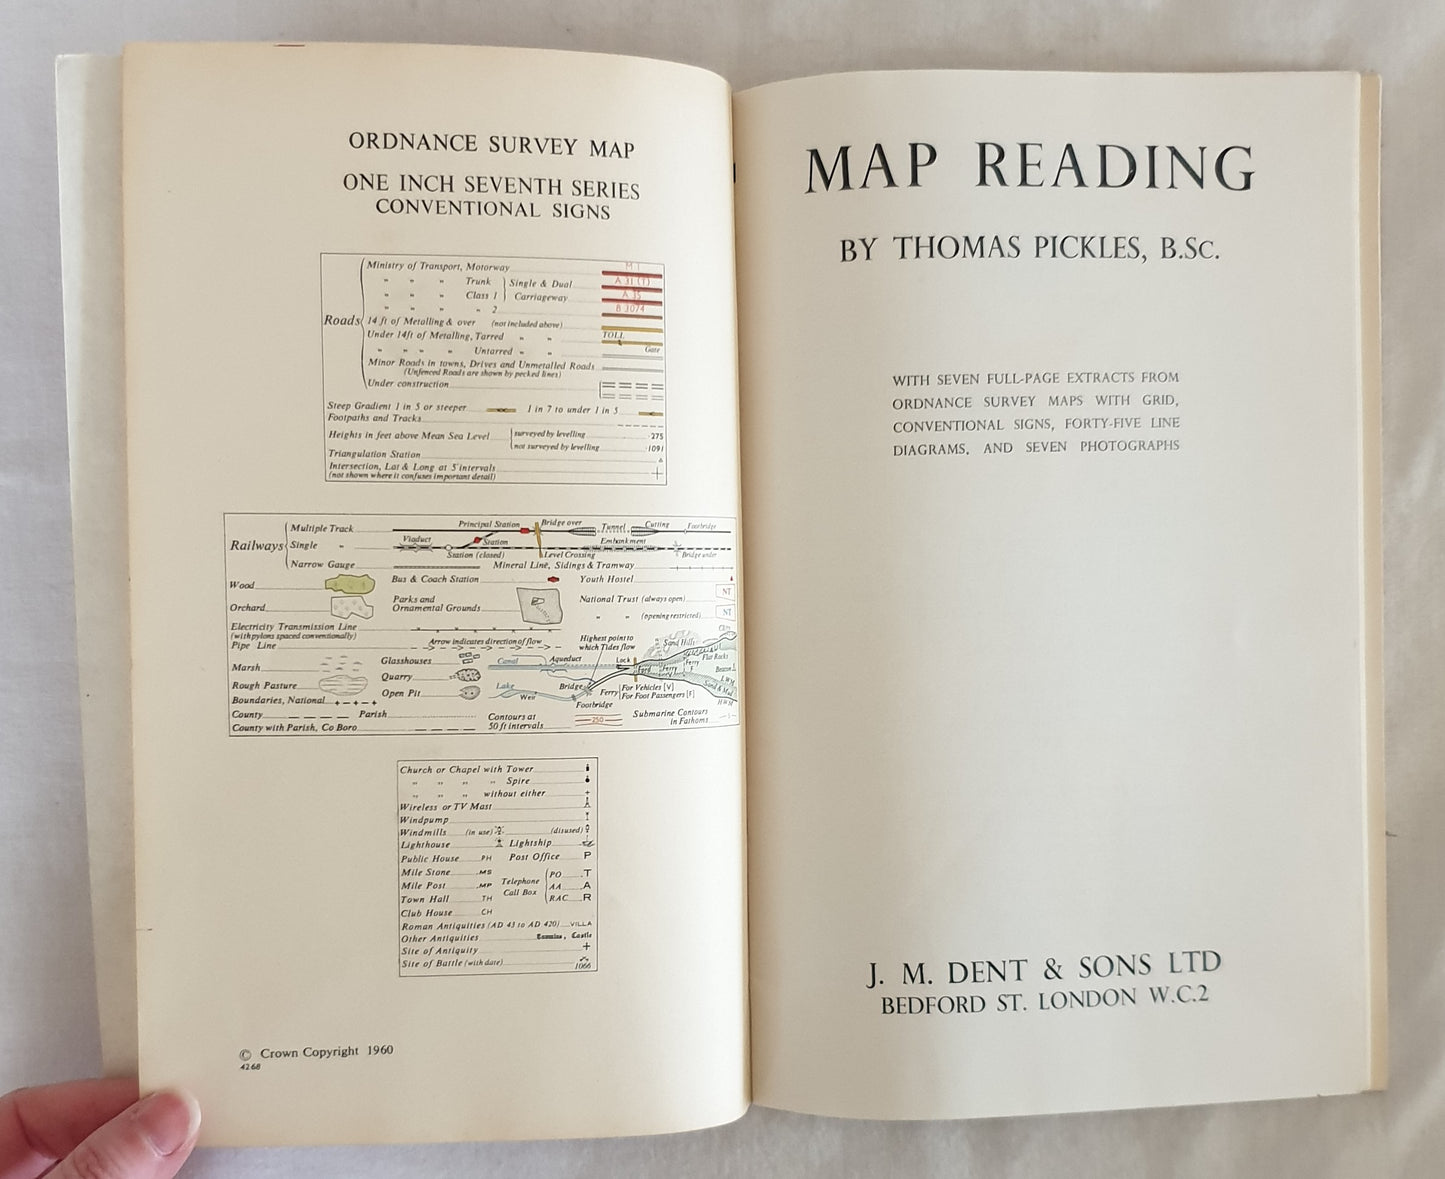 Map Reading by Thomas Pickles